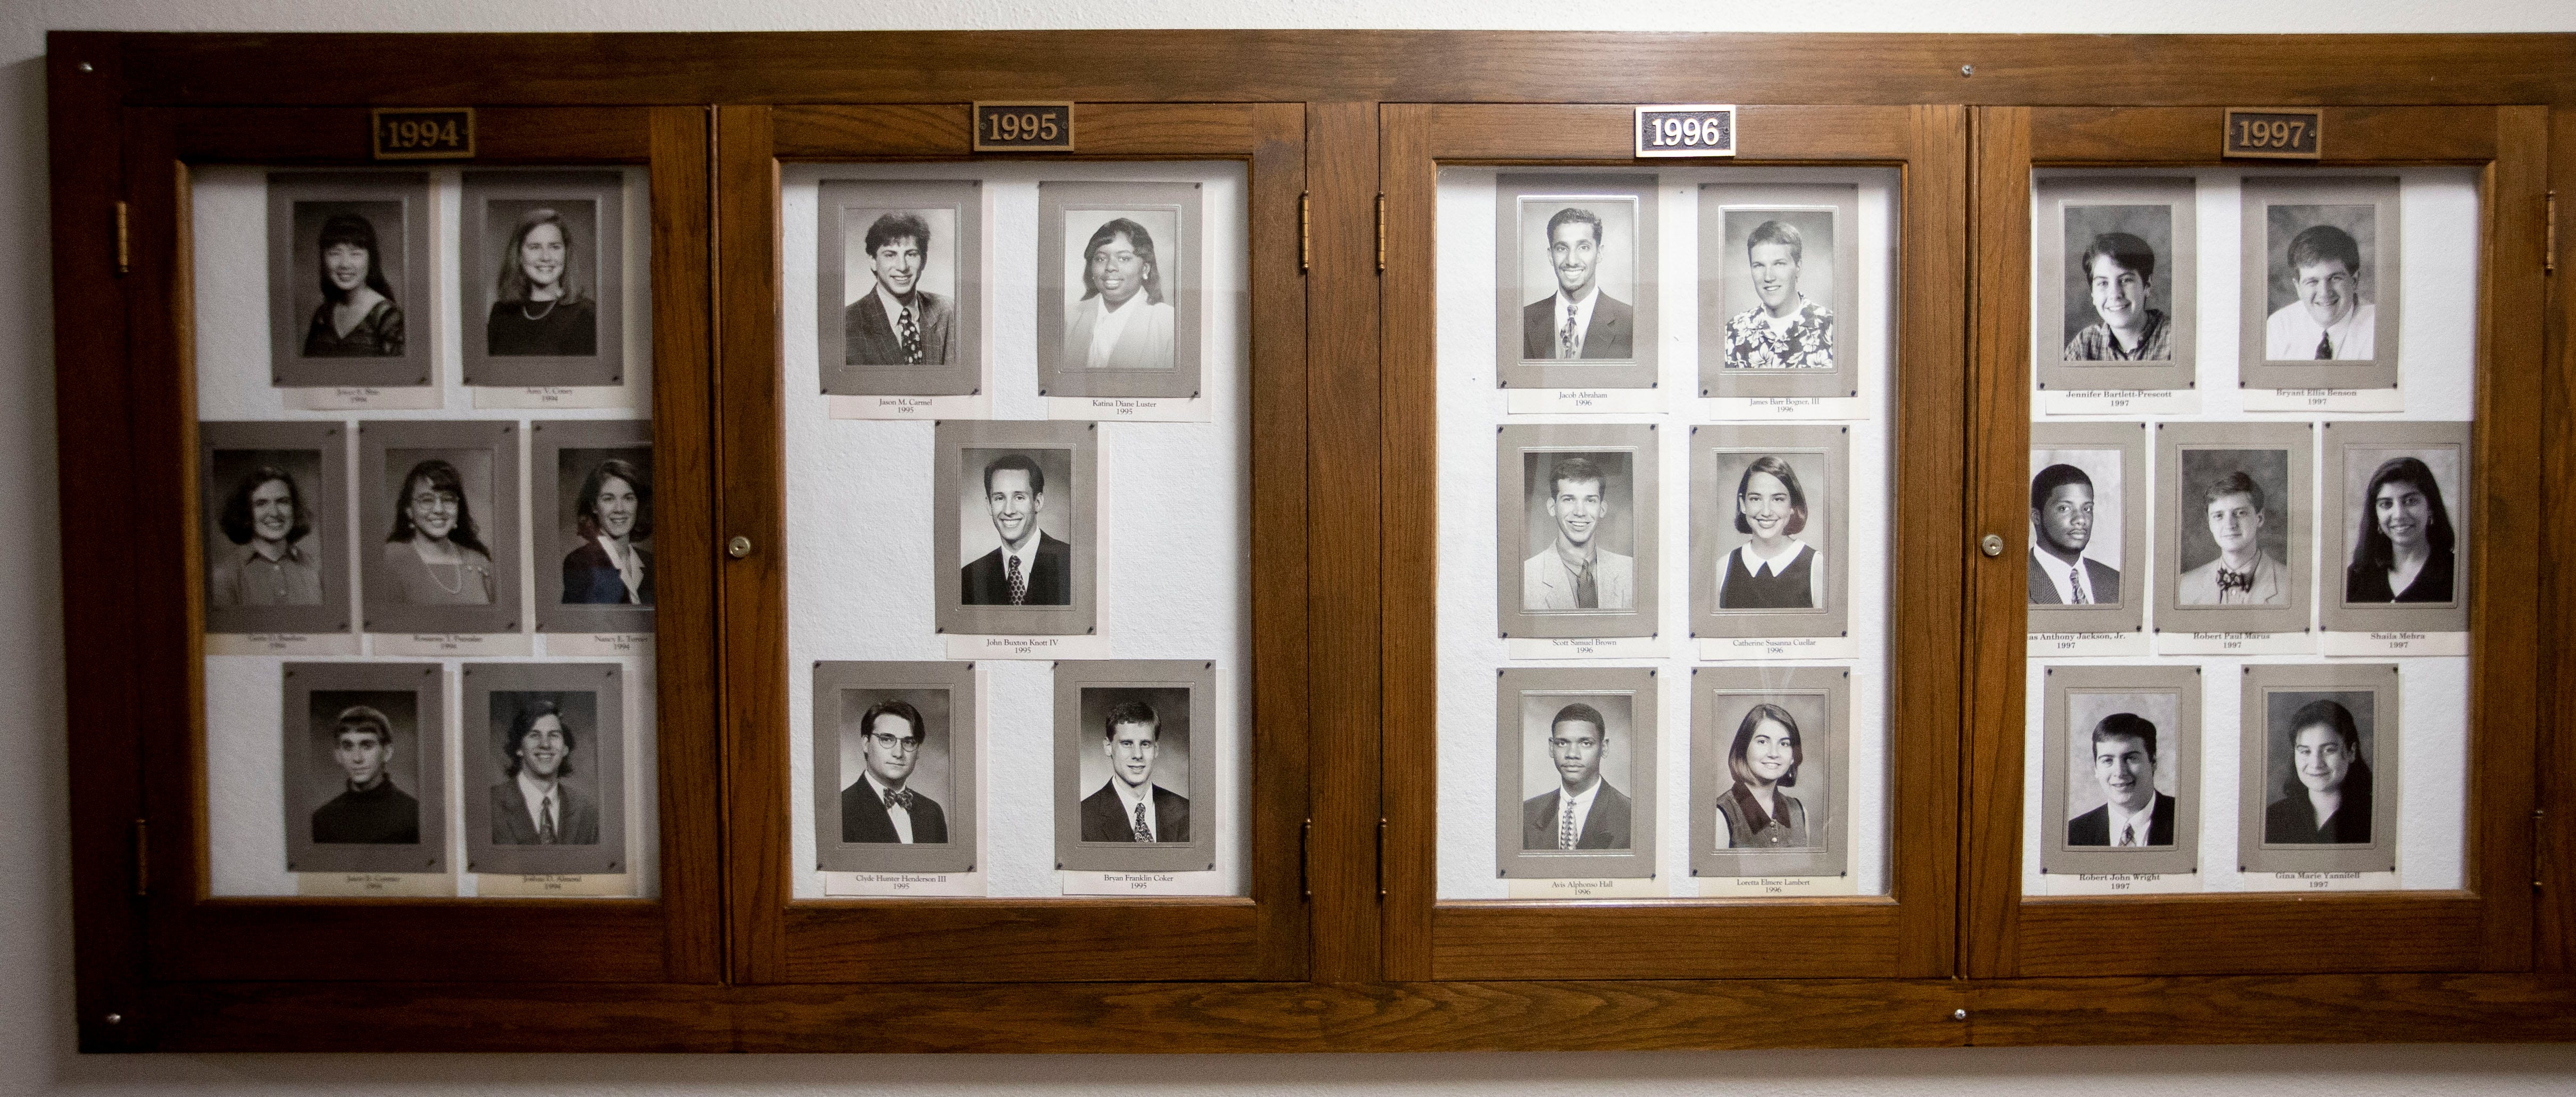 Portraits of Amy Coney Barrett (left frame at the top right) and Robert Marus (right frame in the center), who signed a letter with other alumni opposing Barrett's nomination, hang in a student hall of fame display in Southwestern Hall at Rhodes College.